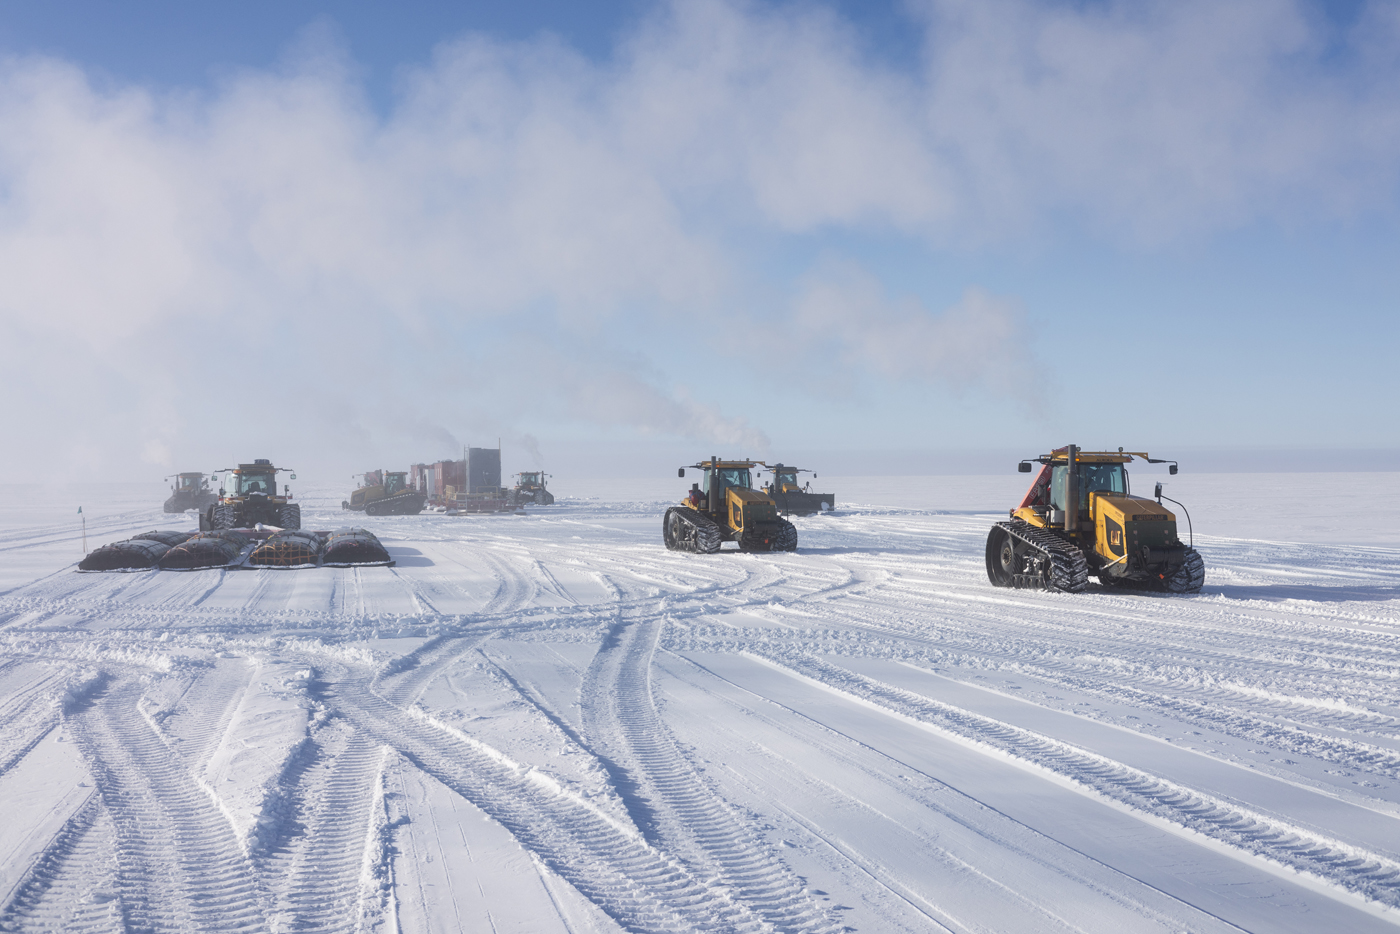 Tractors spread across a snowy landscape with mist hanging above in front of blue sky.